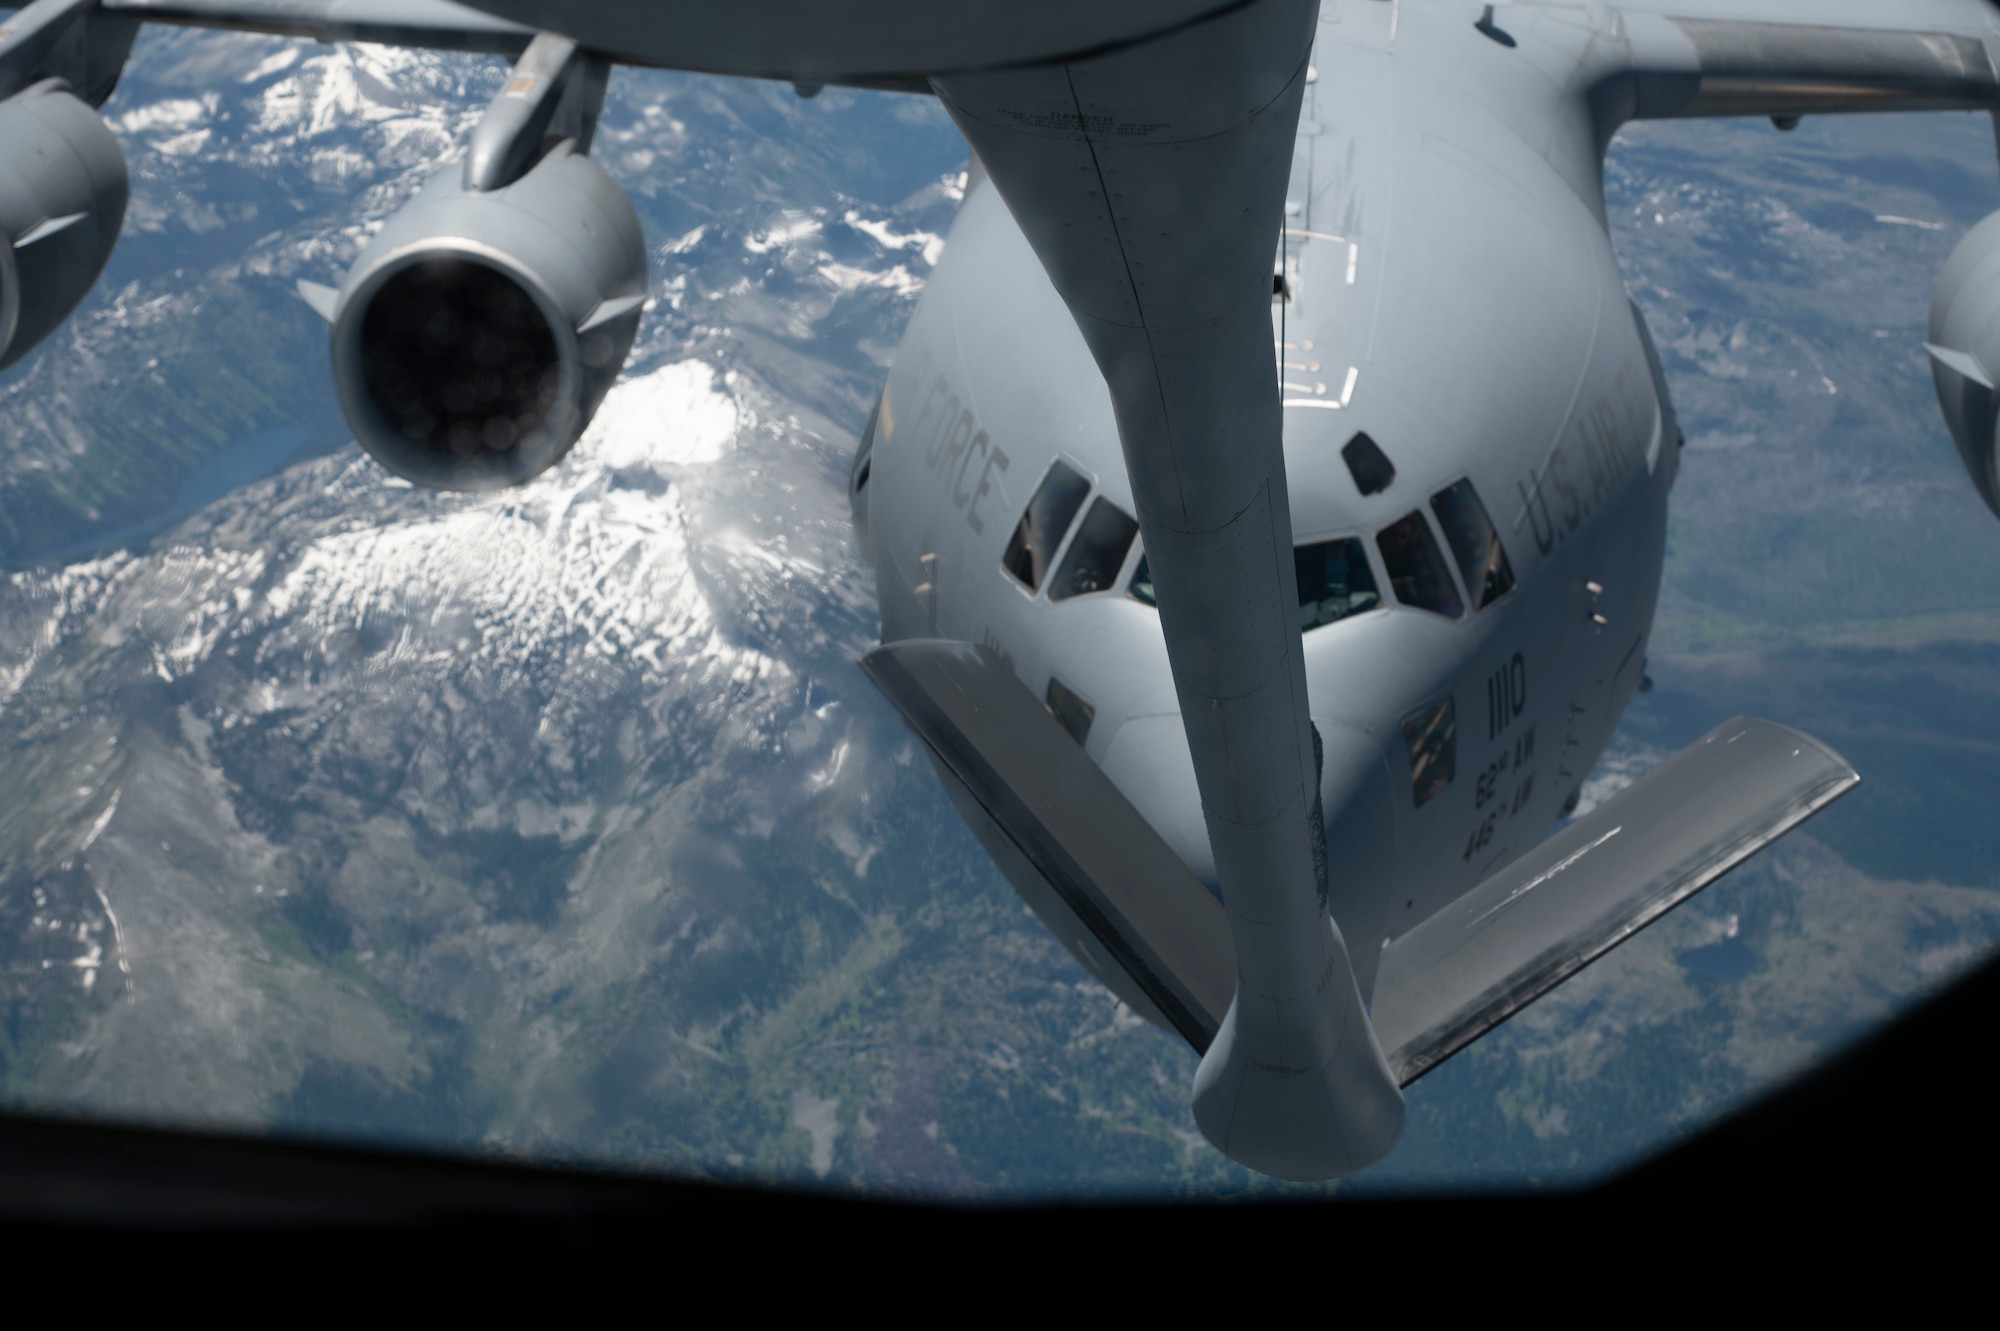 A KC-135 Stratotanker refuels a C-17 Globemaster III during a Pride flight from Fairchild Air Force Base, Washington, June 22, 2023. Airmen participated in a Pride flight that honors the diverse backgrounds and strengths that the lesbian, gay, bisexual, trans, queer, plus Airmen bring to the Fairchild mission. (U.S. Air Force photo by Airman 1st Class Lillian Patterson)